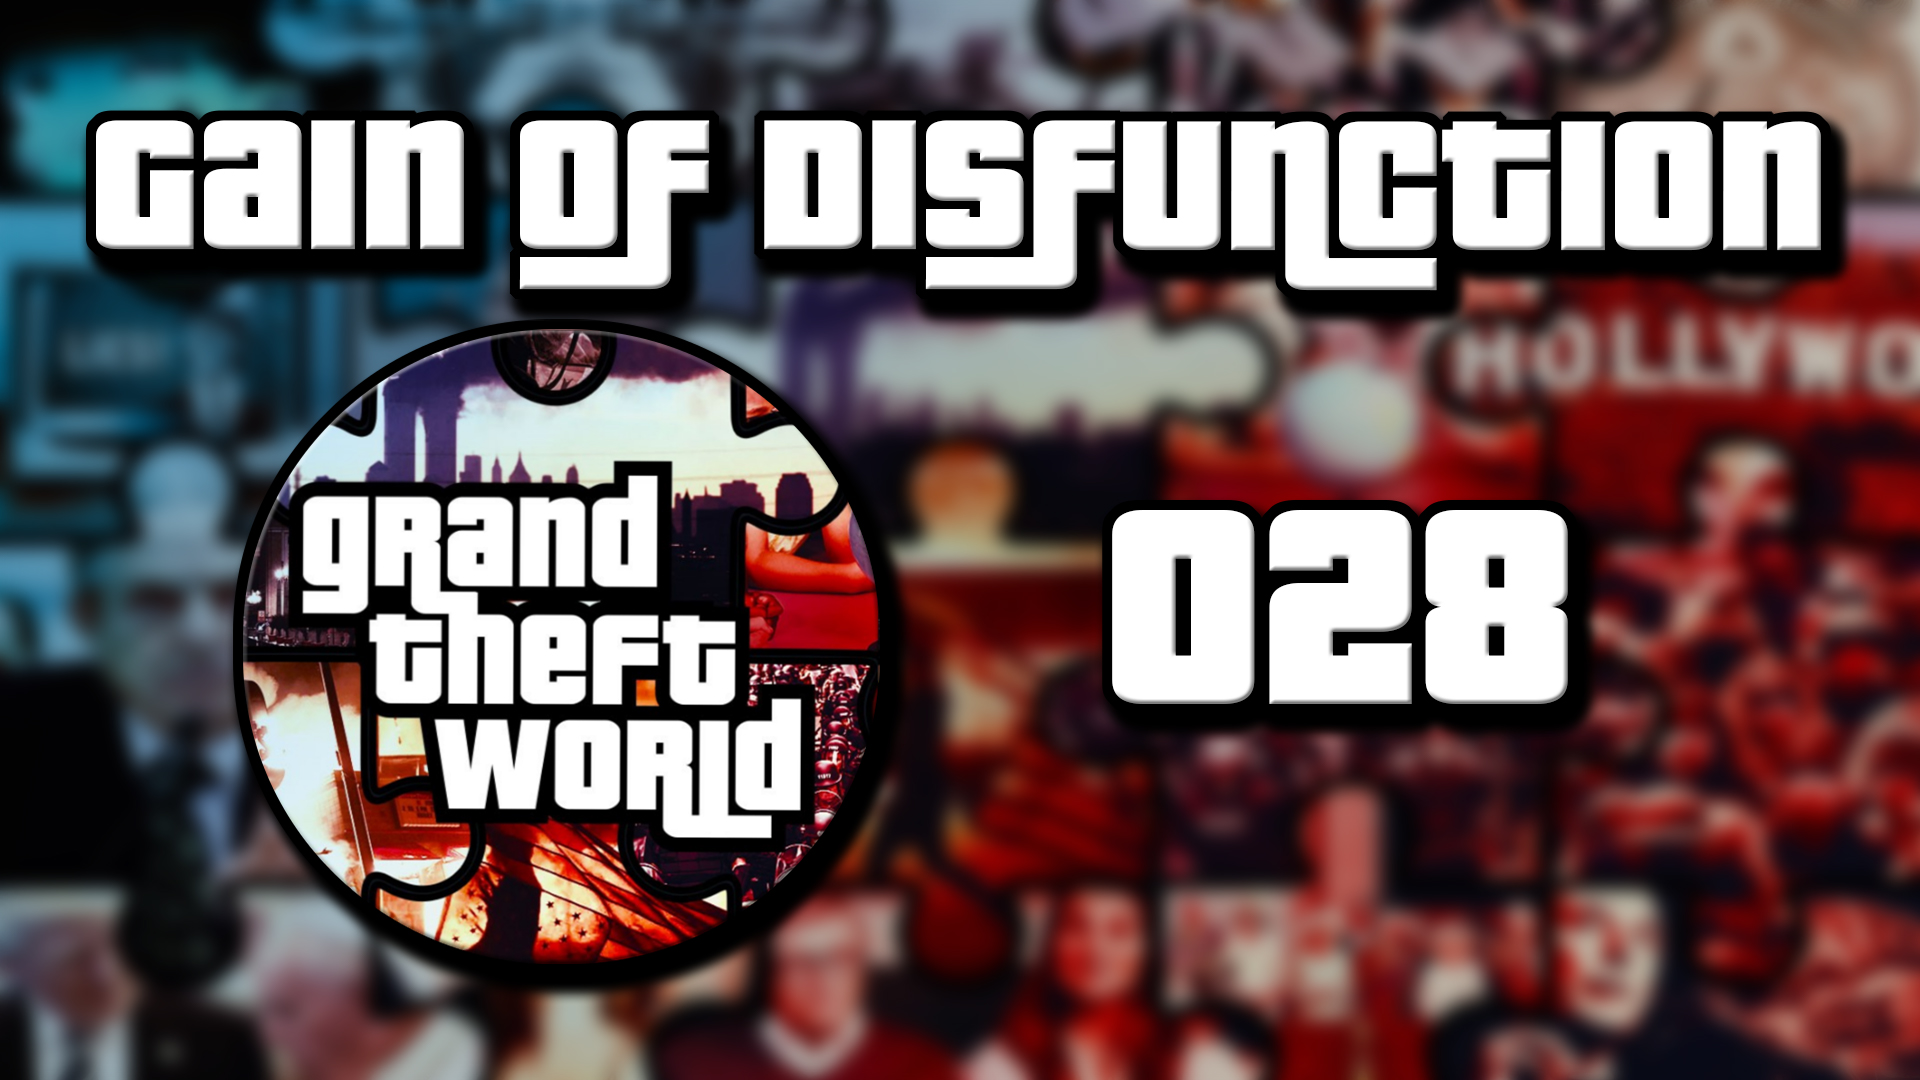 Grand Theft World Podcast 028 | Gain Of DisFunction